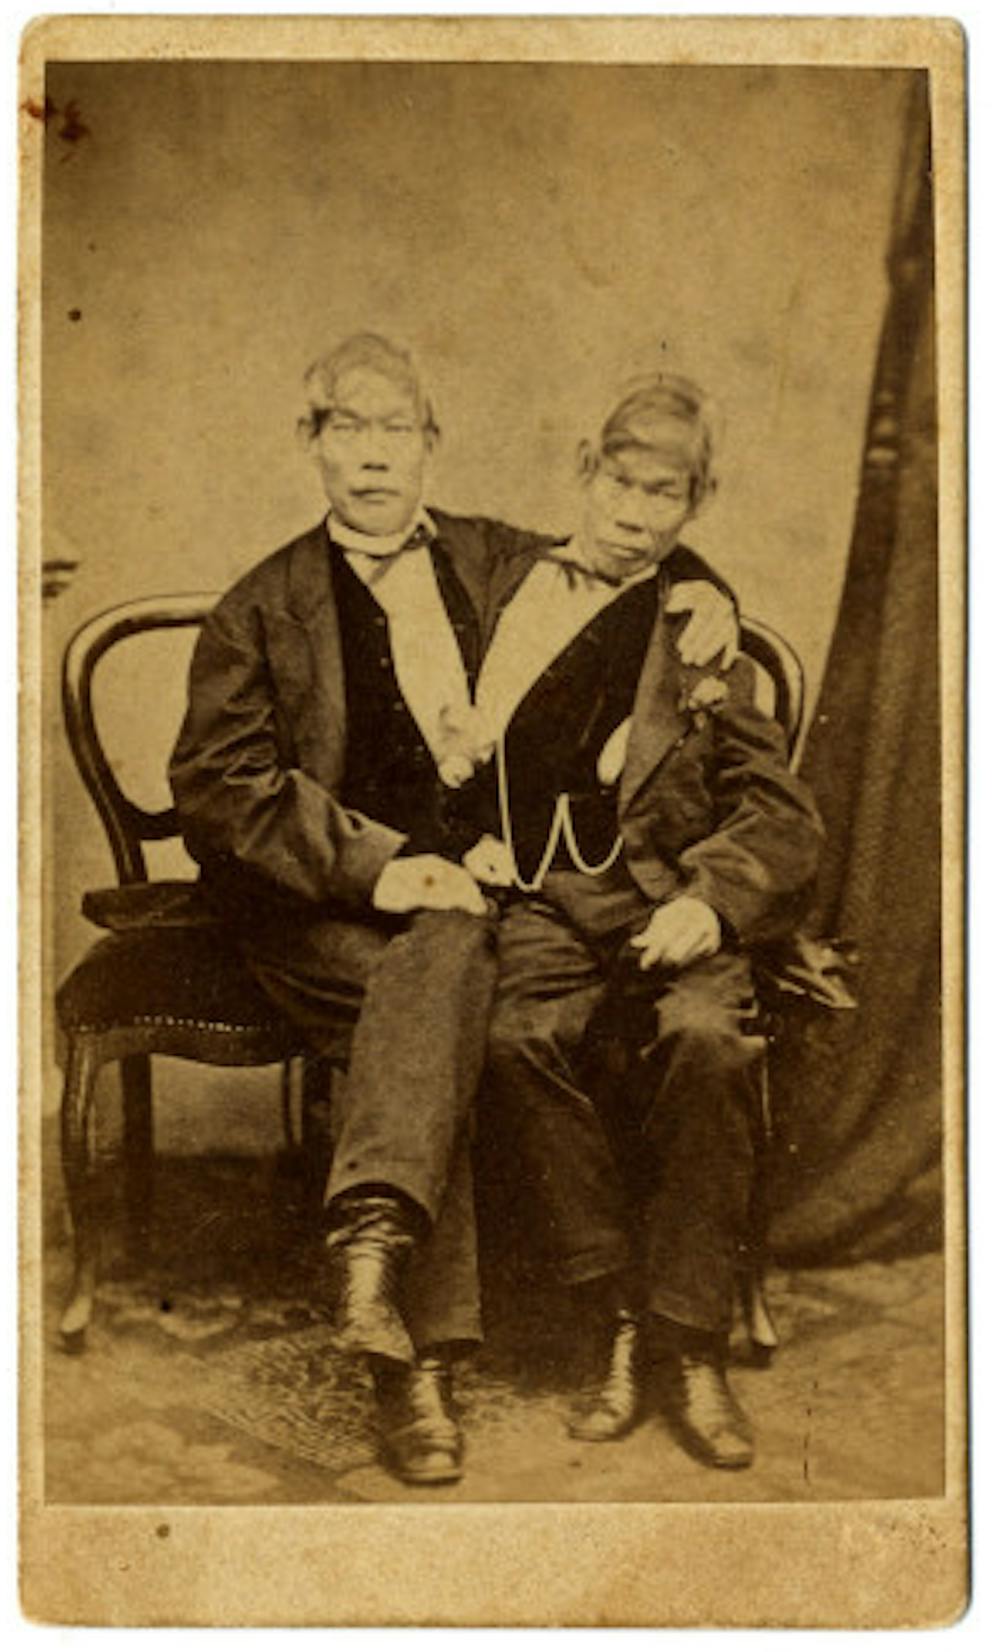 	<p>&#8220;Chang and Eng Bunker, Seated&#8221; Portrait Collection (P2), <a href="http://dc.lib.unc.edu/cdm4/item_viewer.php?CISOROOT=/bunkers&amp;amp;CISOPTR=802&amp;amp;CISOBOX=1&amp;amp;REC=2">North Carolina Collection Photographic Archvies</a>, Wilson Library, University of North Carolina.</p>